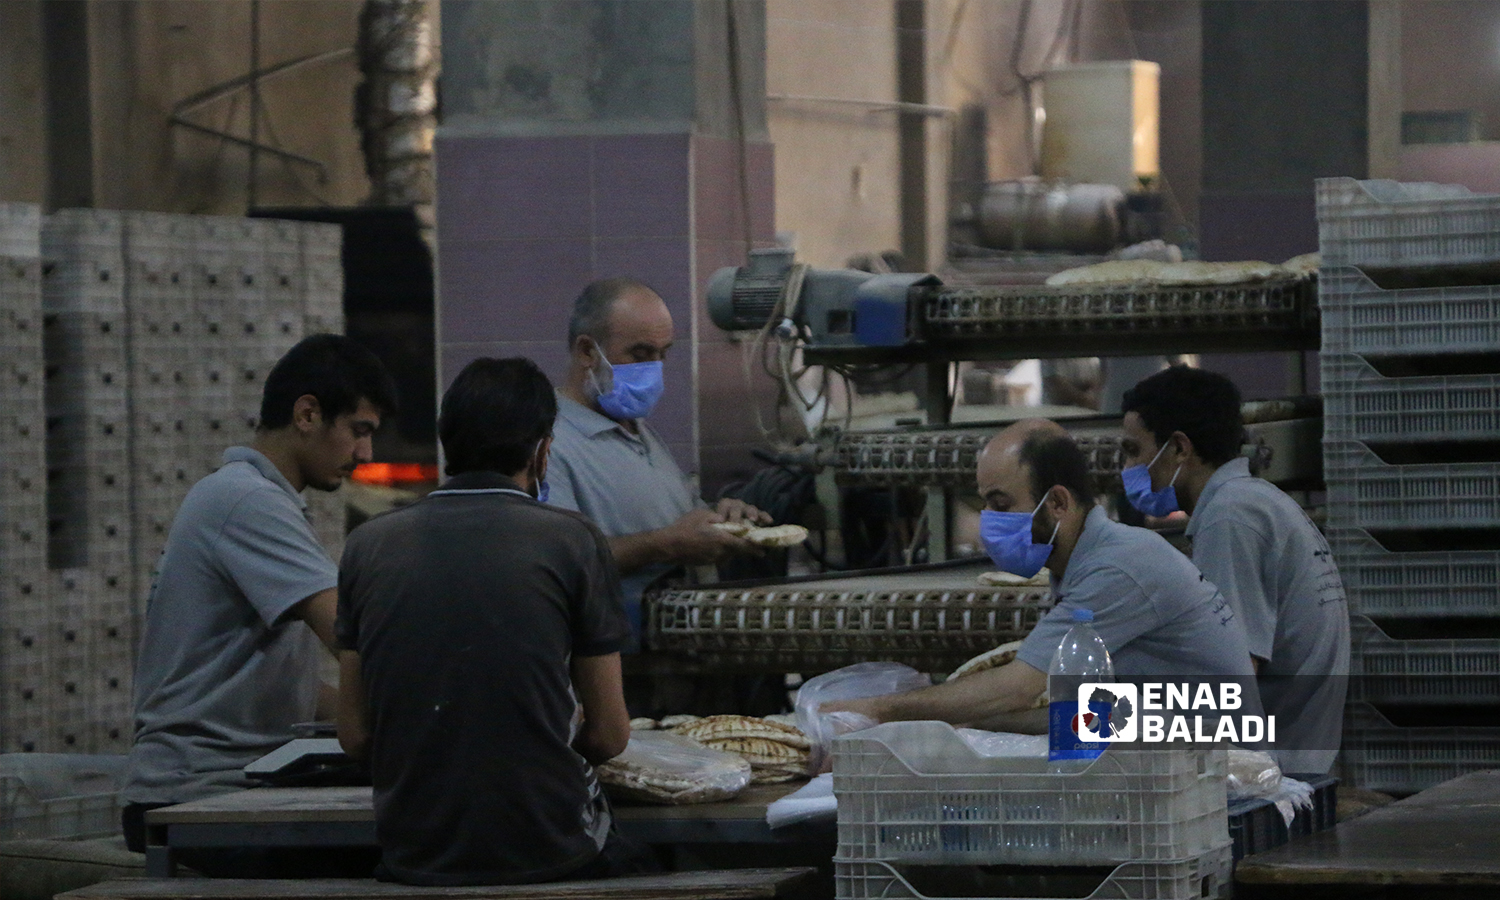 Workers packing bread in nylon bags in the al-Bab city’s automated bakery - 8 October 2021 (Enab Baladi - Siraj Mohammed) 